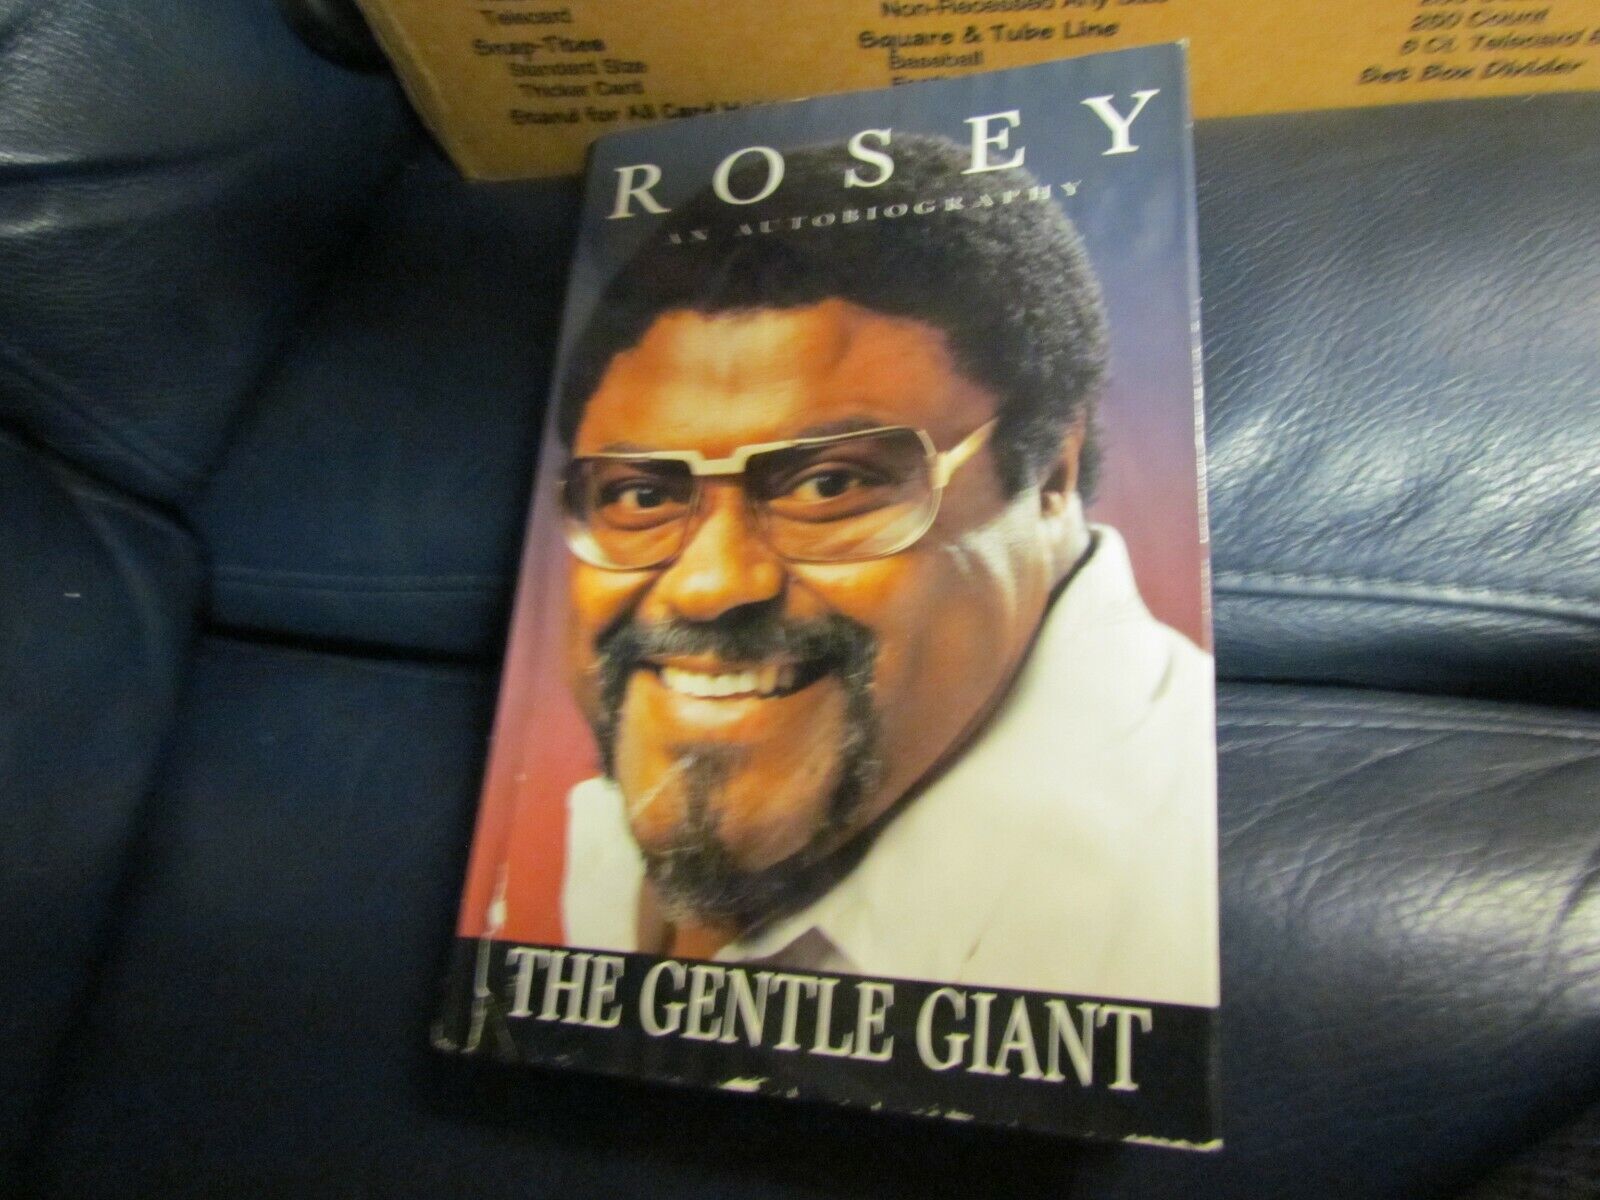 Rosey grier autographed signed rosey an autobiography the gentle giant book jsa auction cert